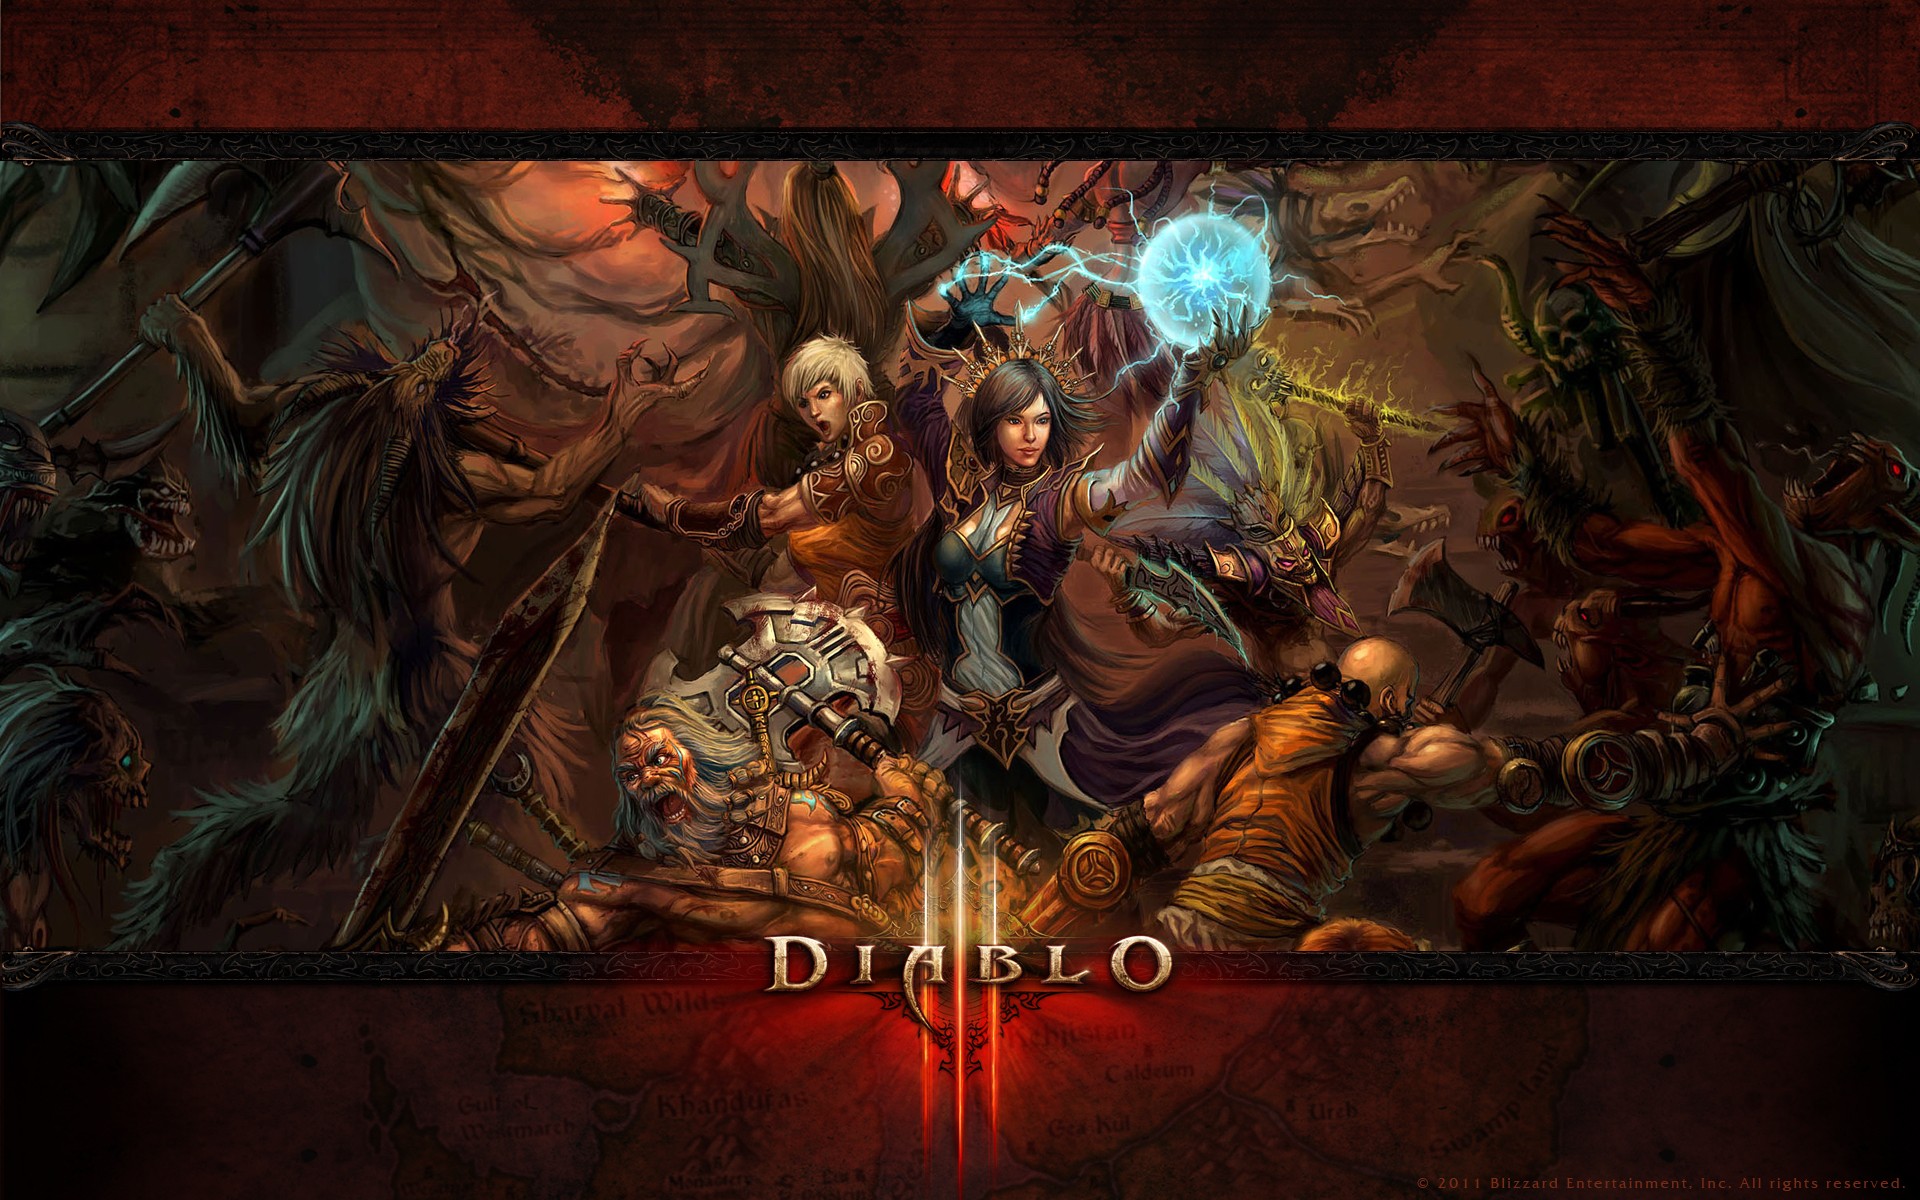 mage, Video, Games, Undead, Fight, Barbarian, Blizzard, Entertainment, Artwork, Diablo, Iii, Monk, Logos, Witch, Doctor Wallpaper